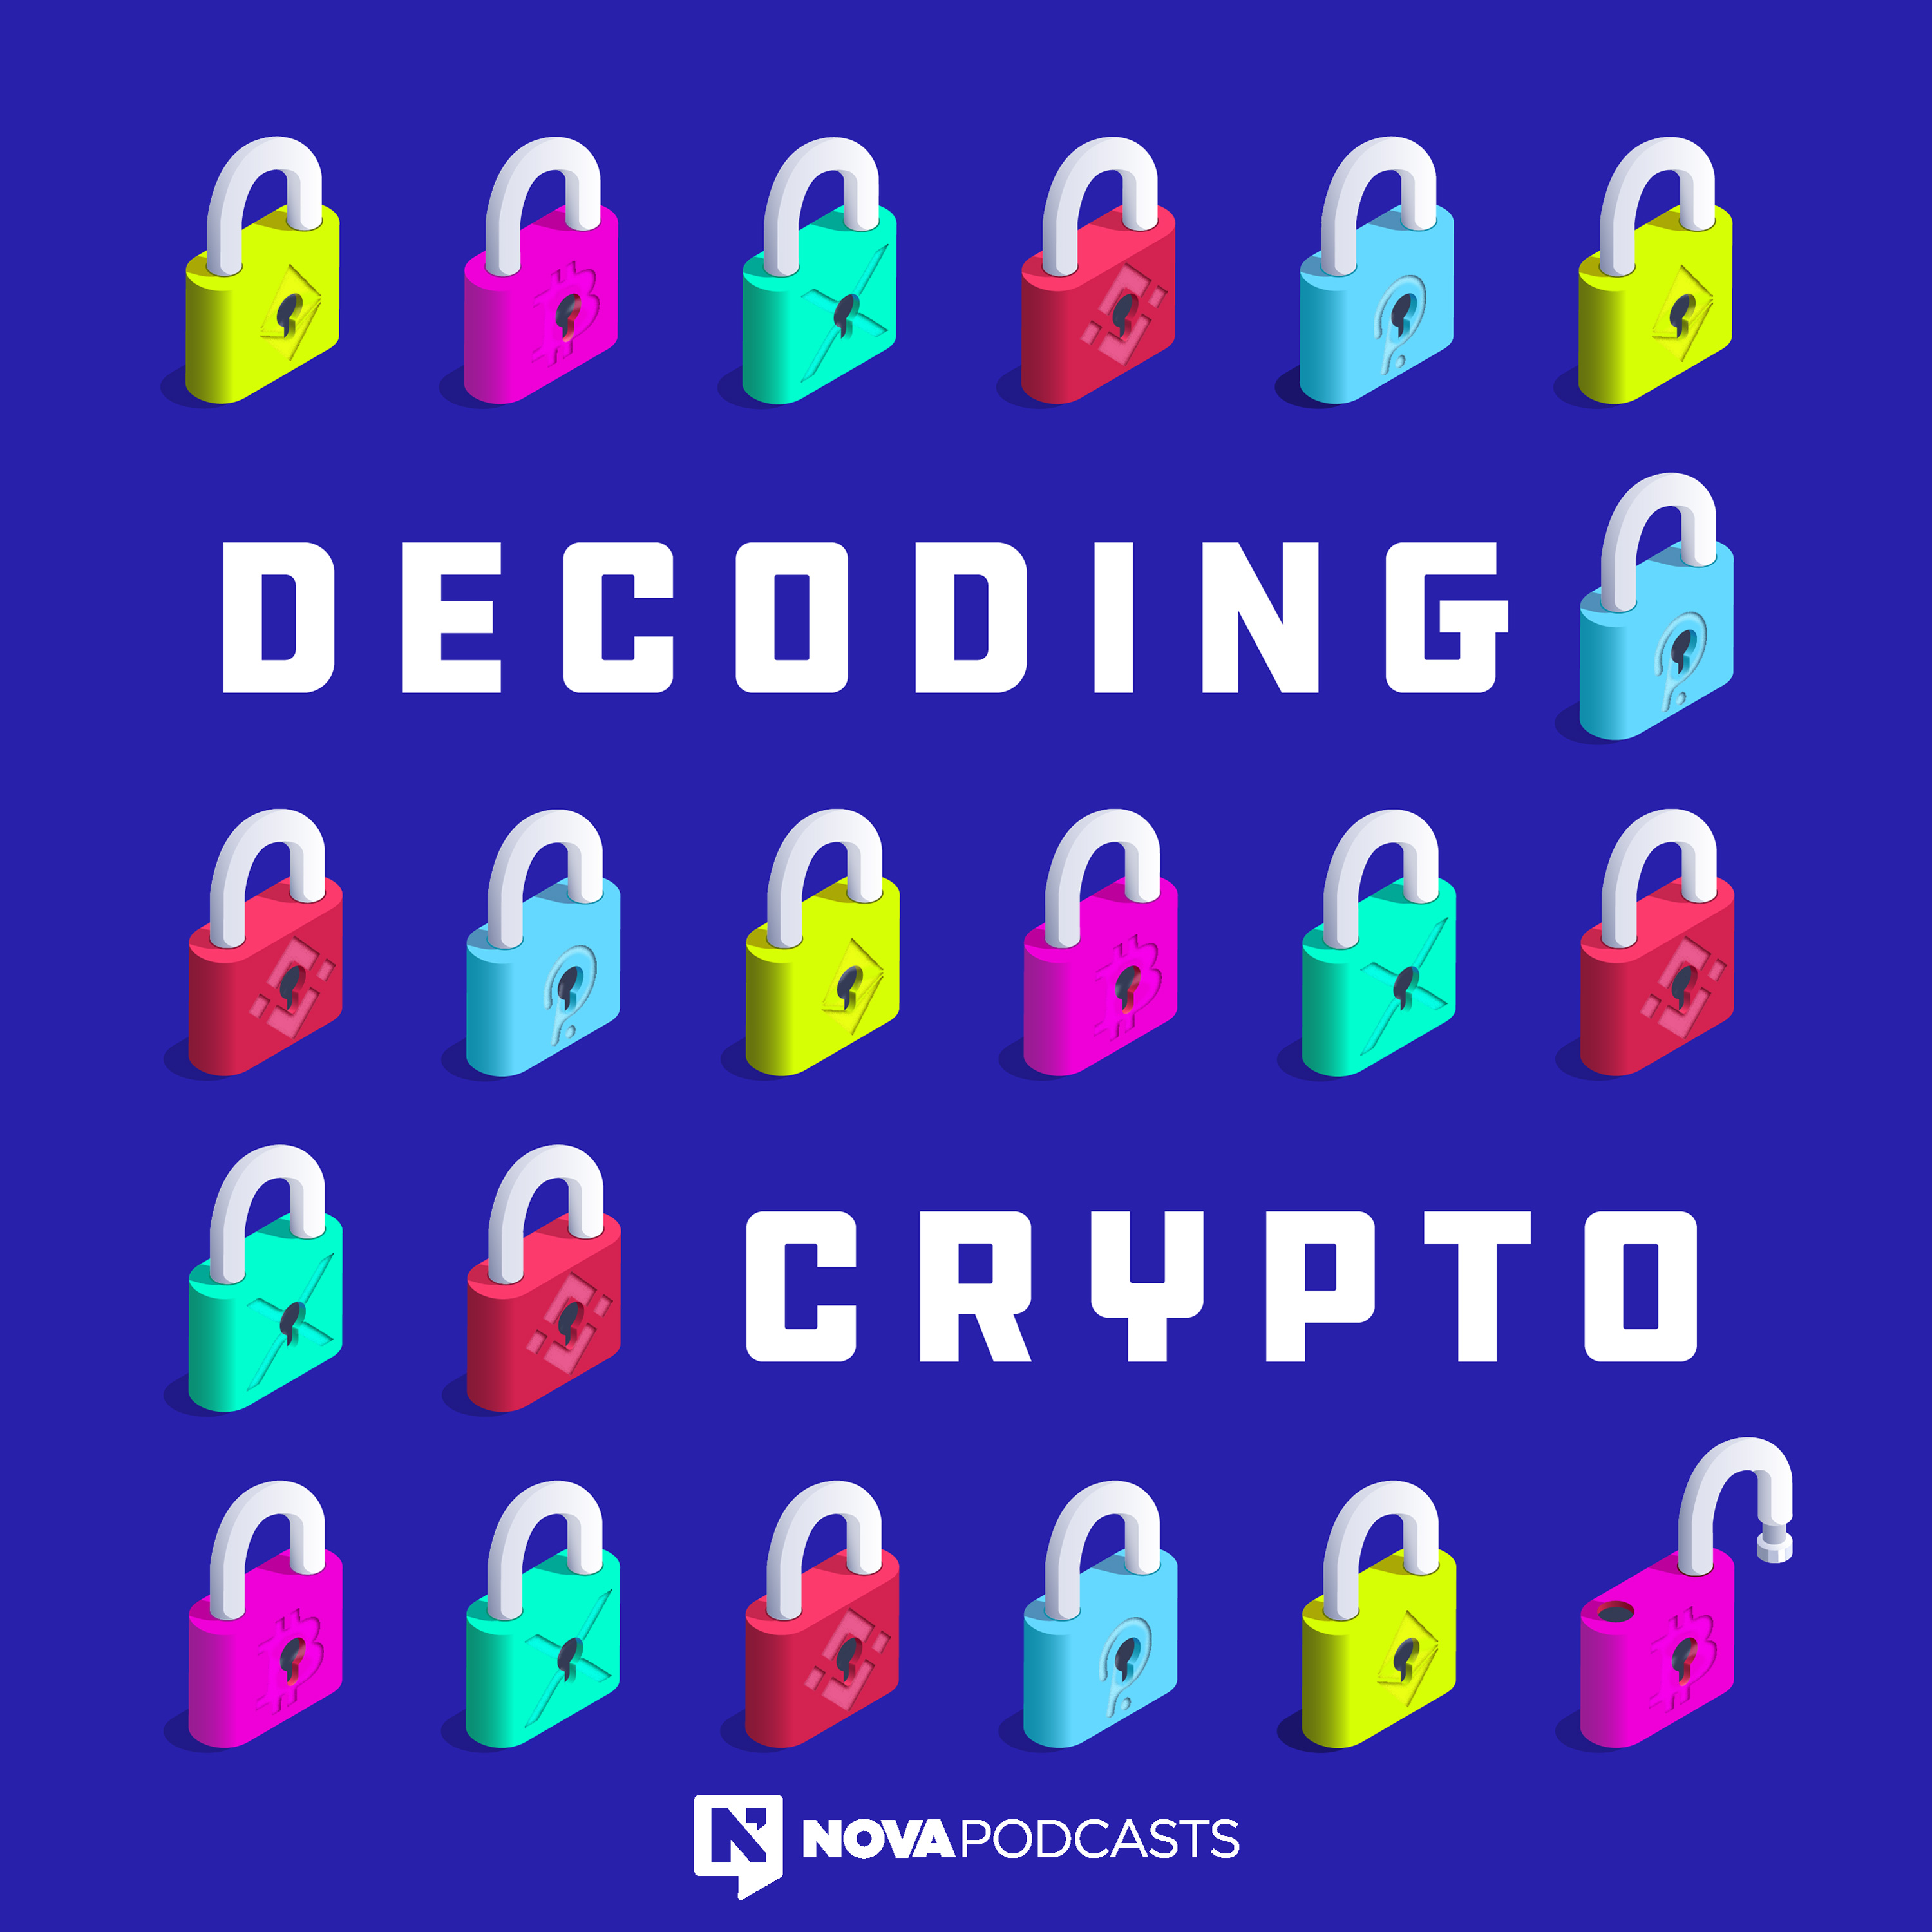 How To Earn Crypto By Listening To Podcasts